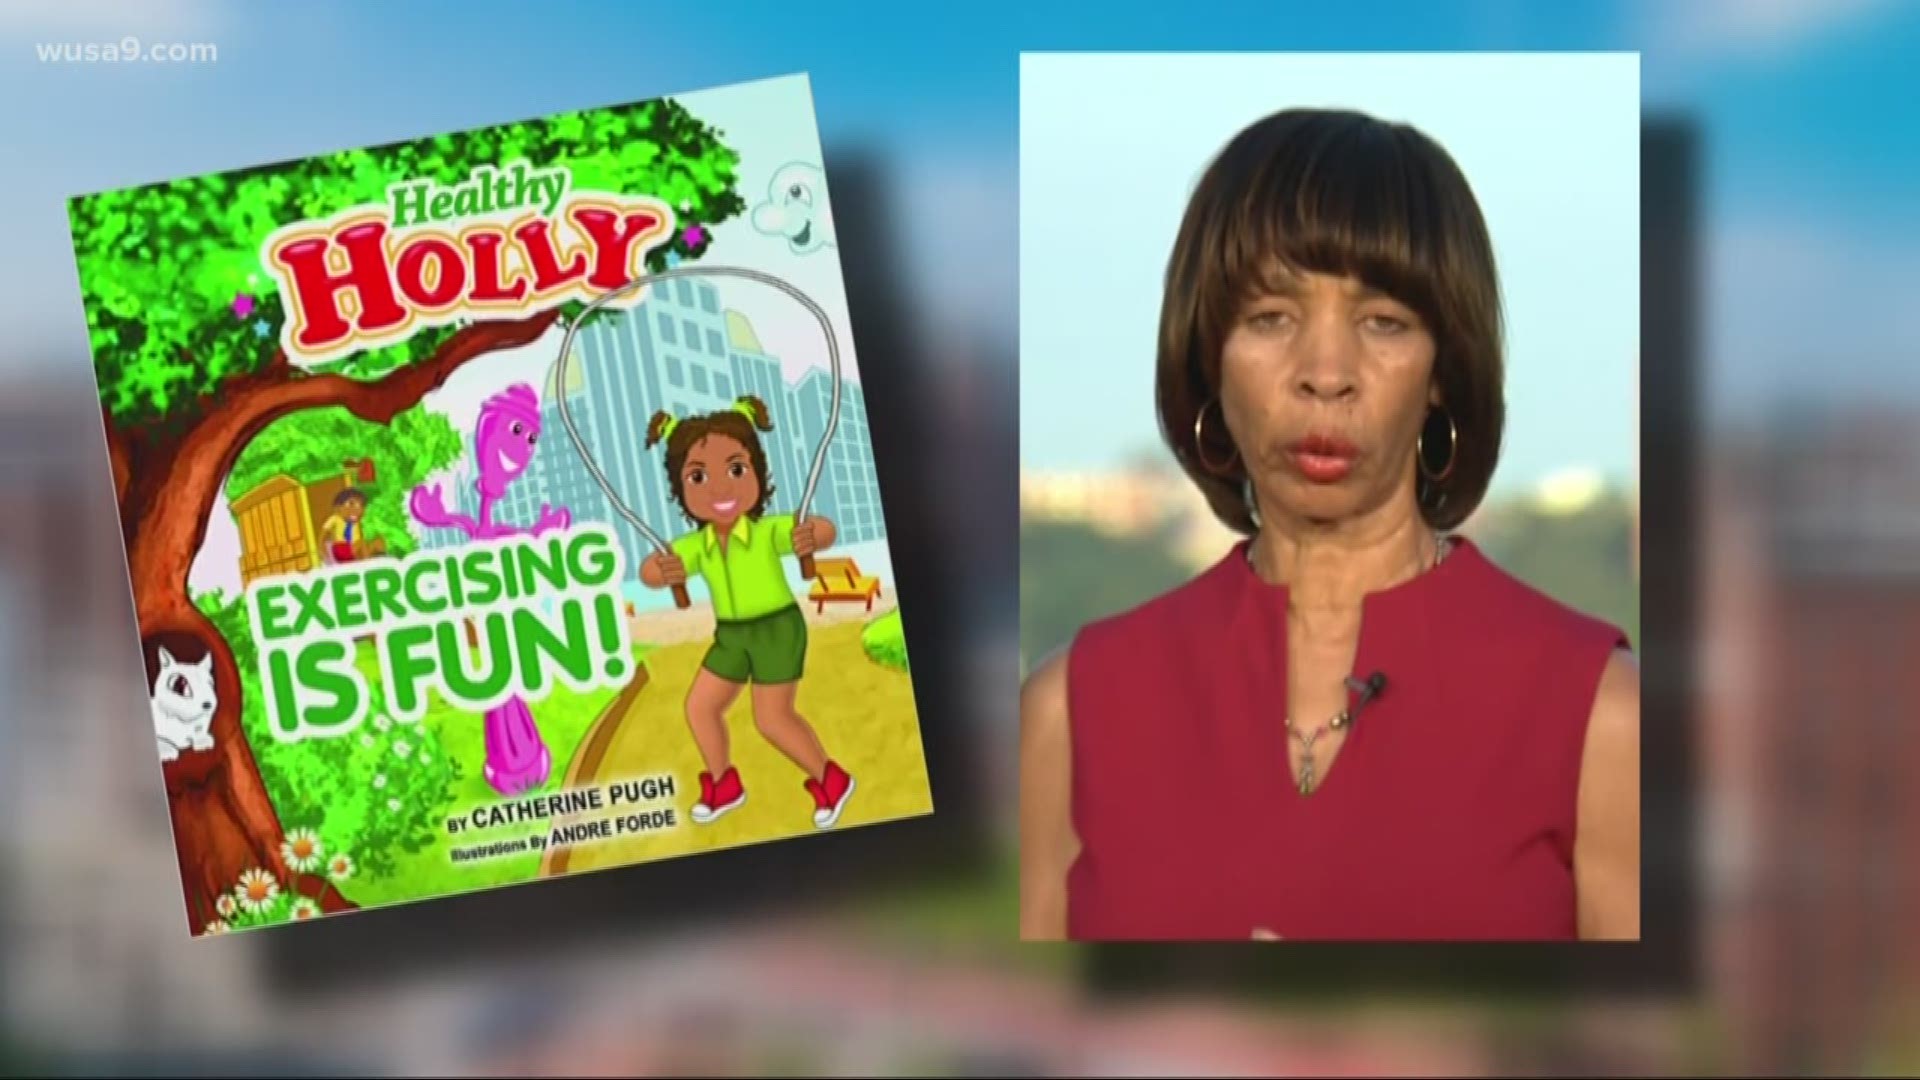 Mayor Catherine Pugh has reported being paid at least $100,000 thousand dollars by the University of Maryland Health system for children’s books she wrote and gave to city school kids.